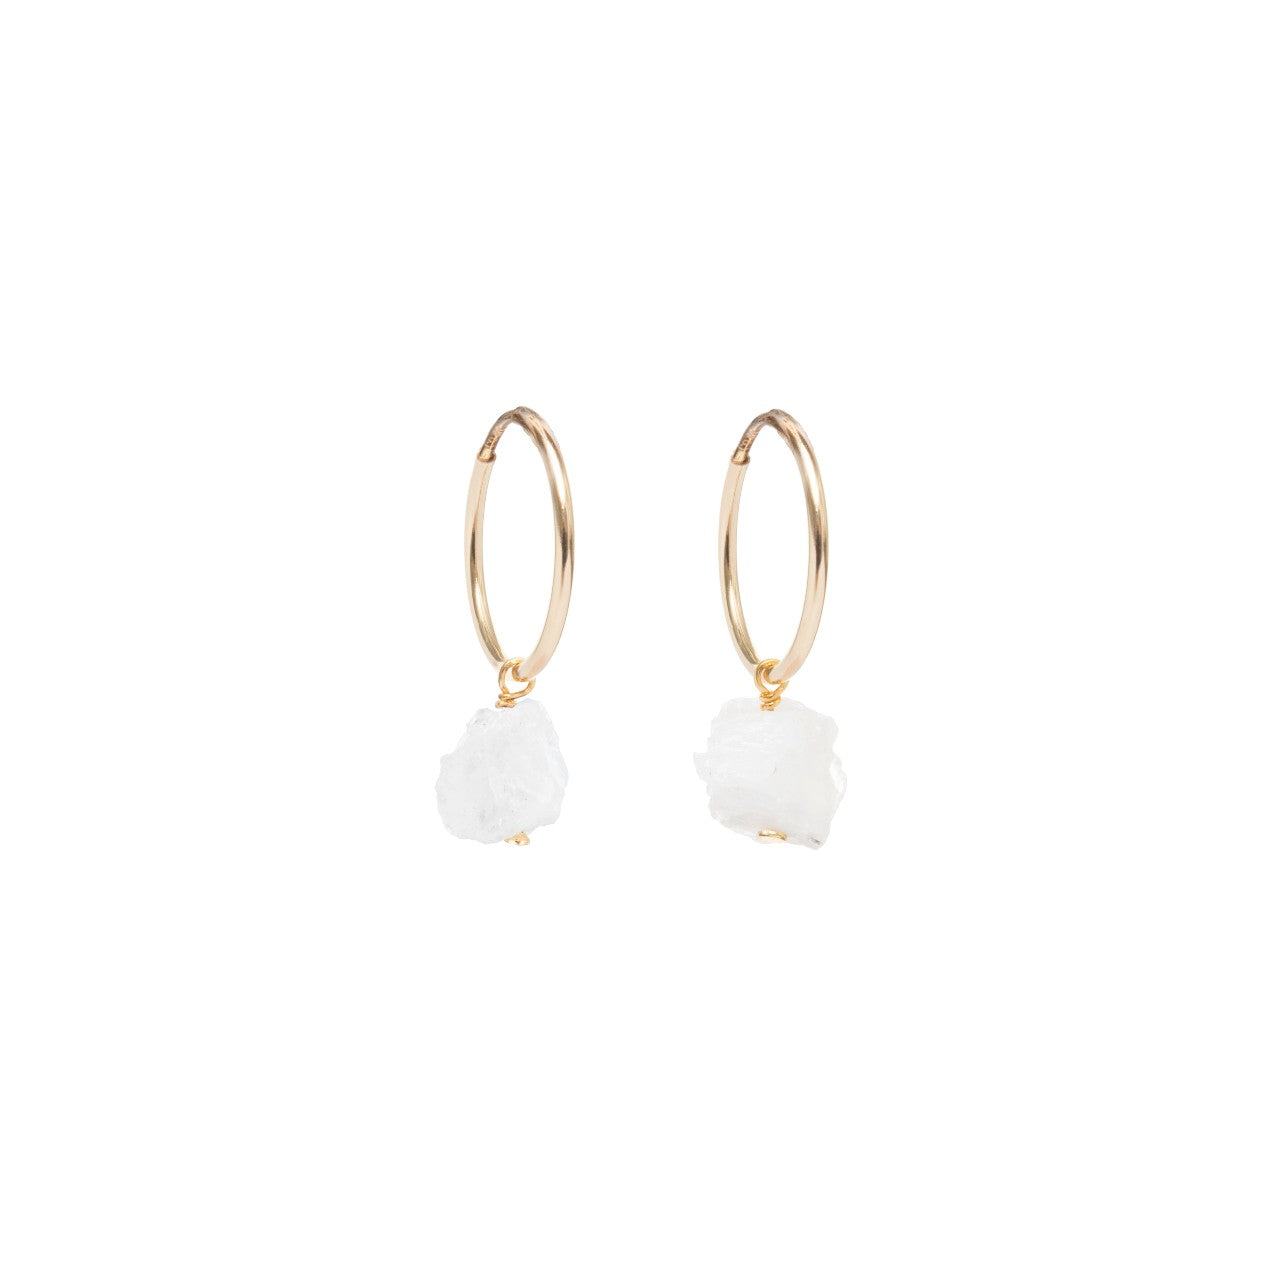 Moonstone Threaded Hoop Earrings | Intuition (Gold Fill)